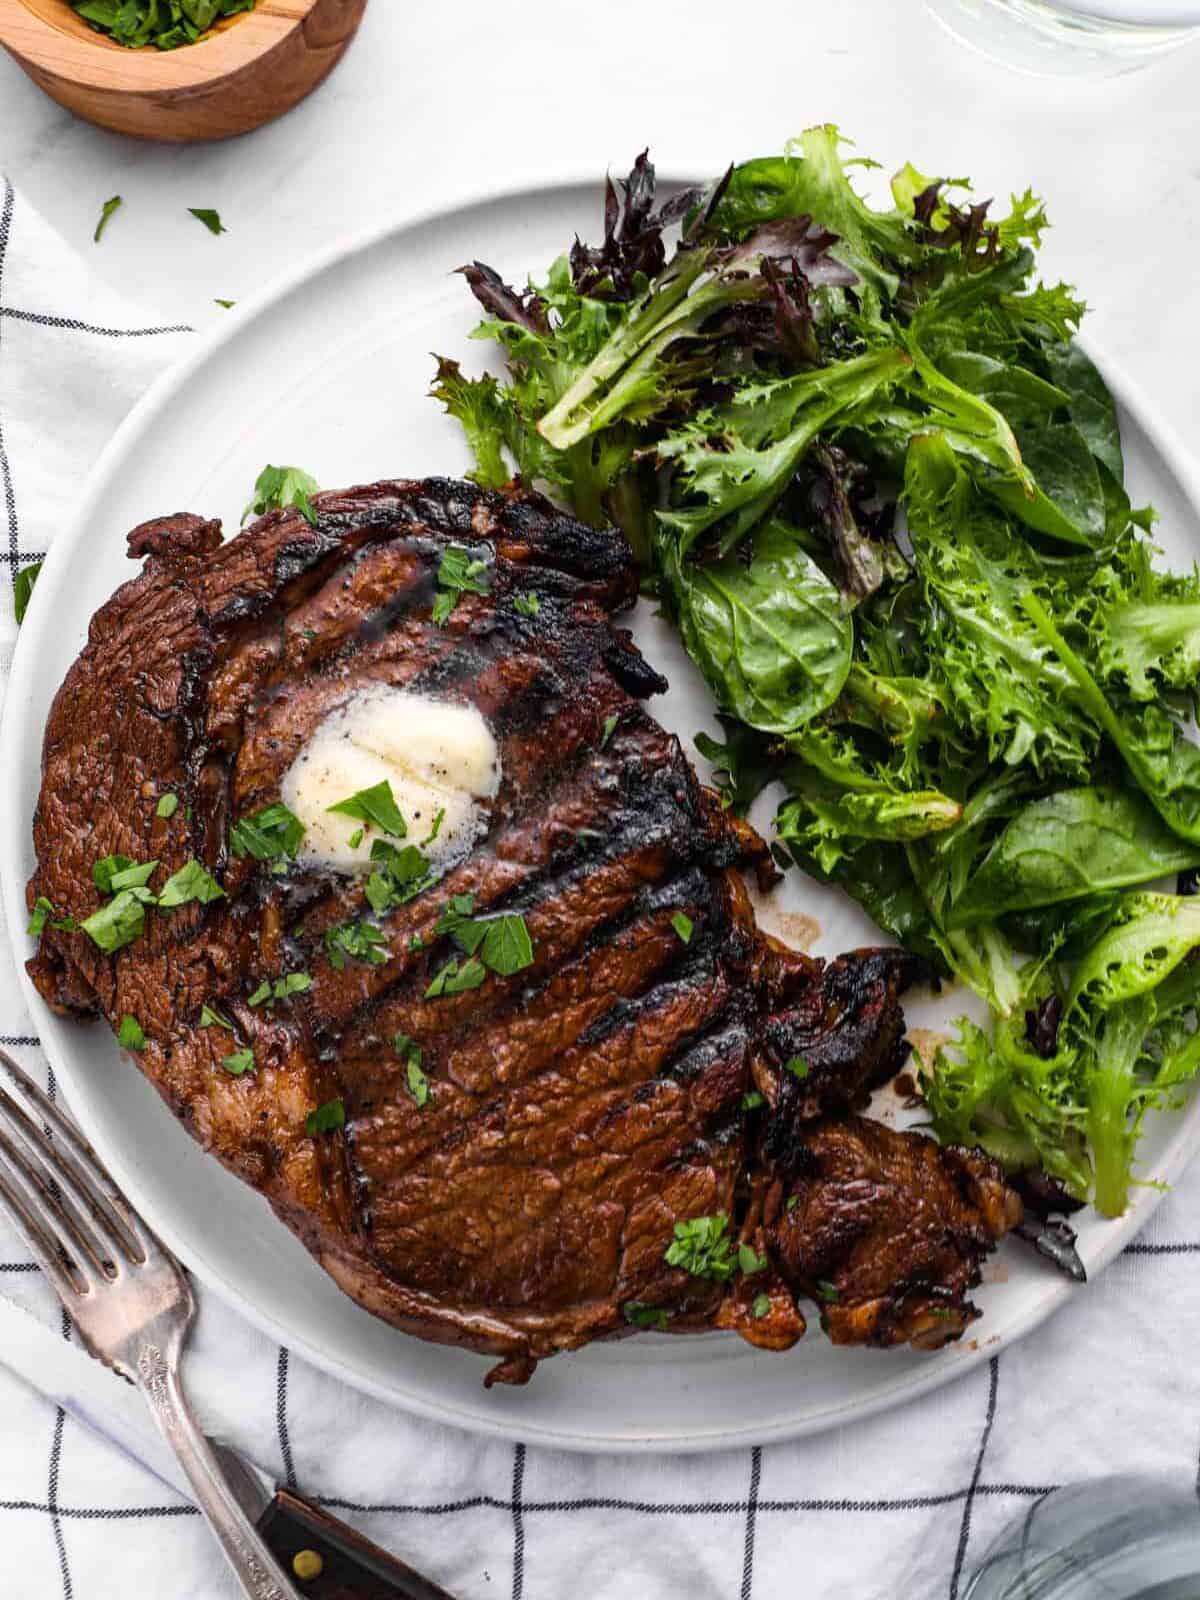 overhead view of a marinated ribeye steak on a white plate with butter and salad greens.